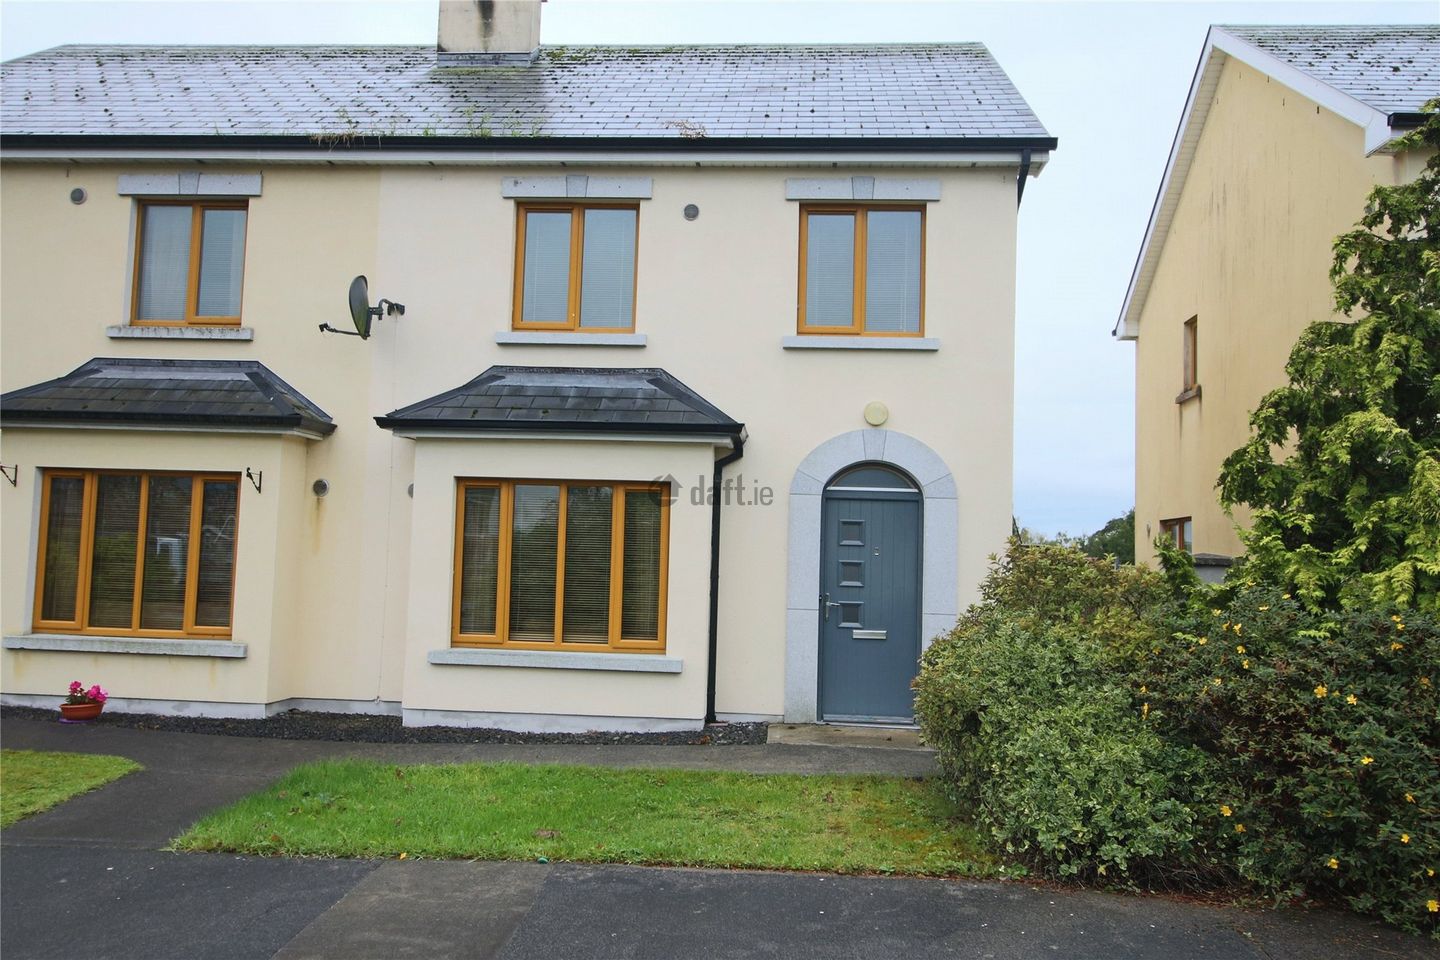 2 Oakport, Cootehall, Co. Roscommon